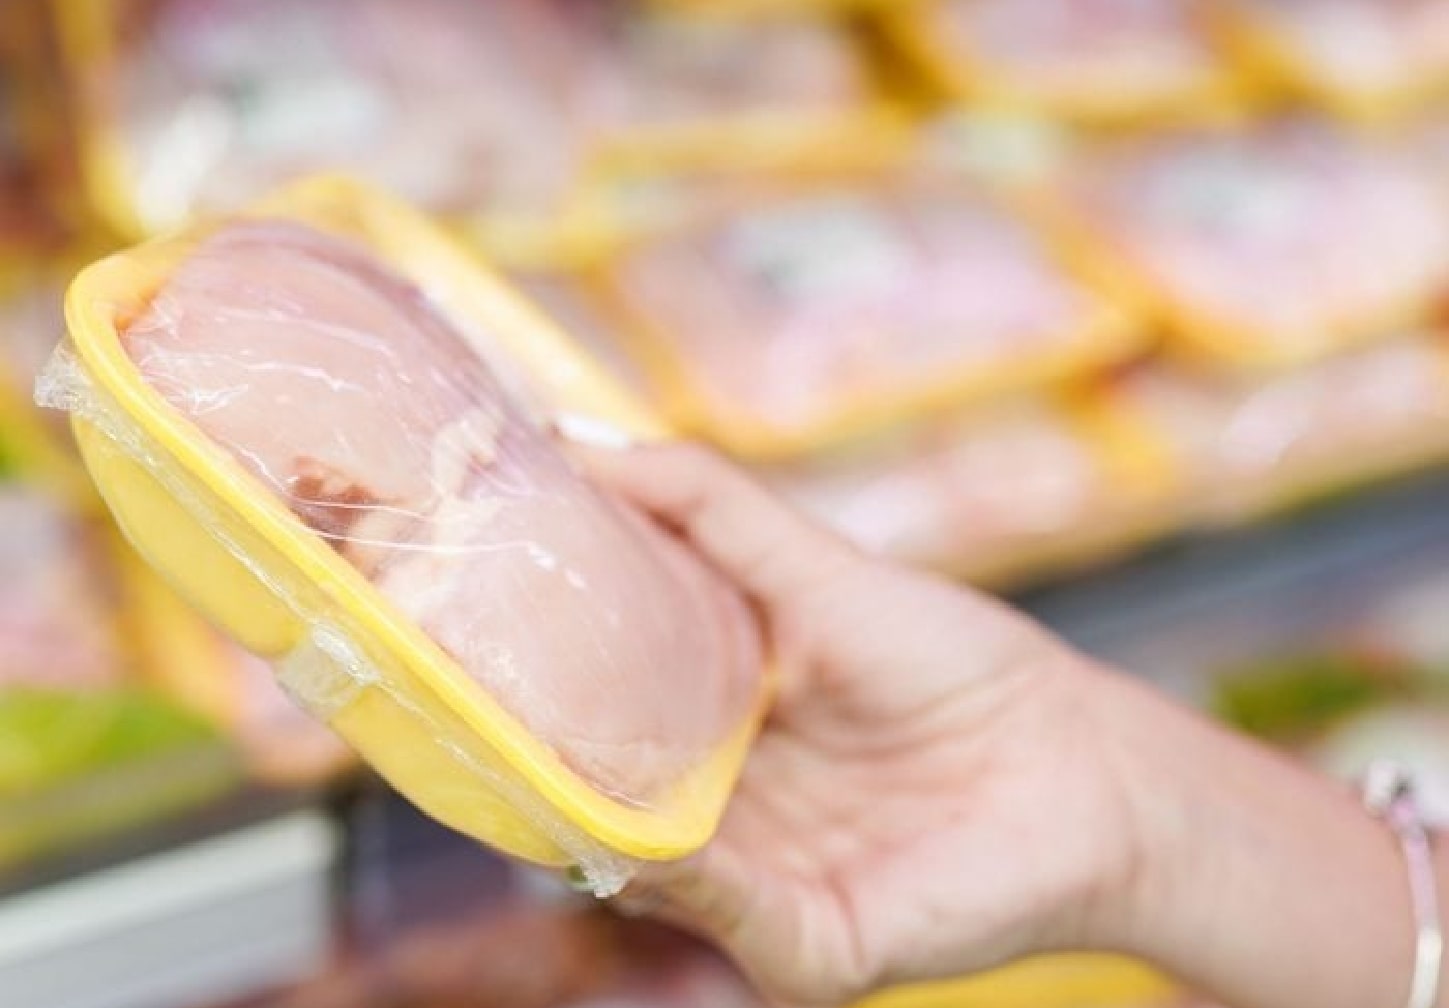 Expert Tips for Choosing Quality Chicken Products